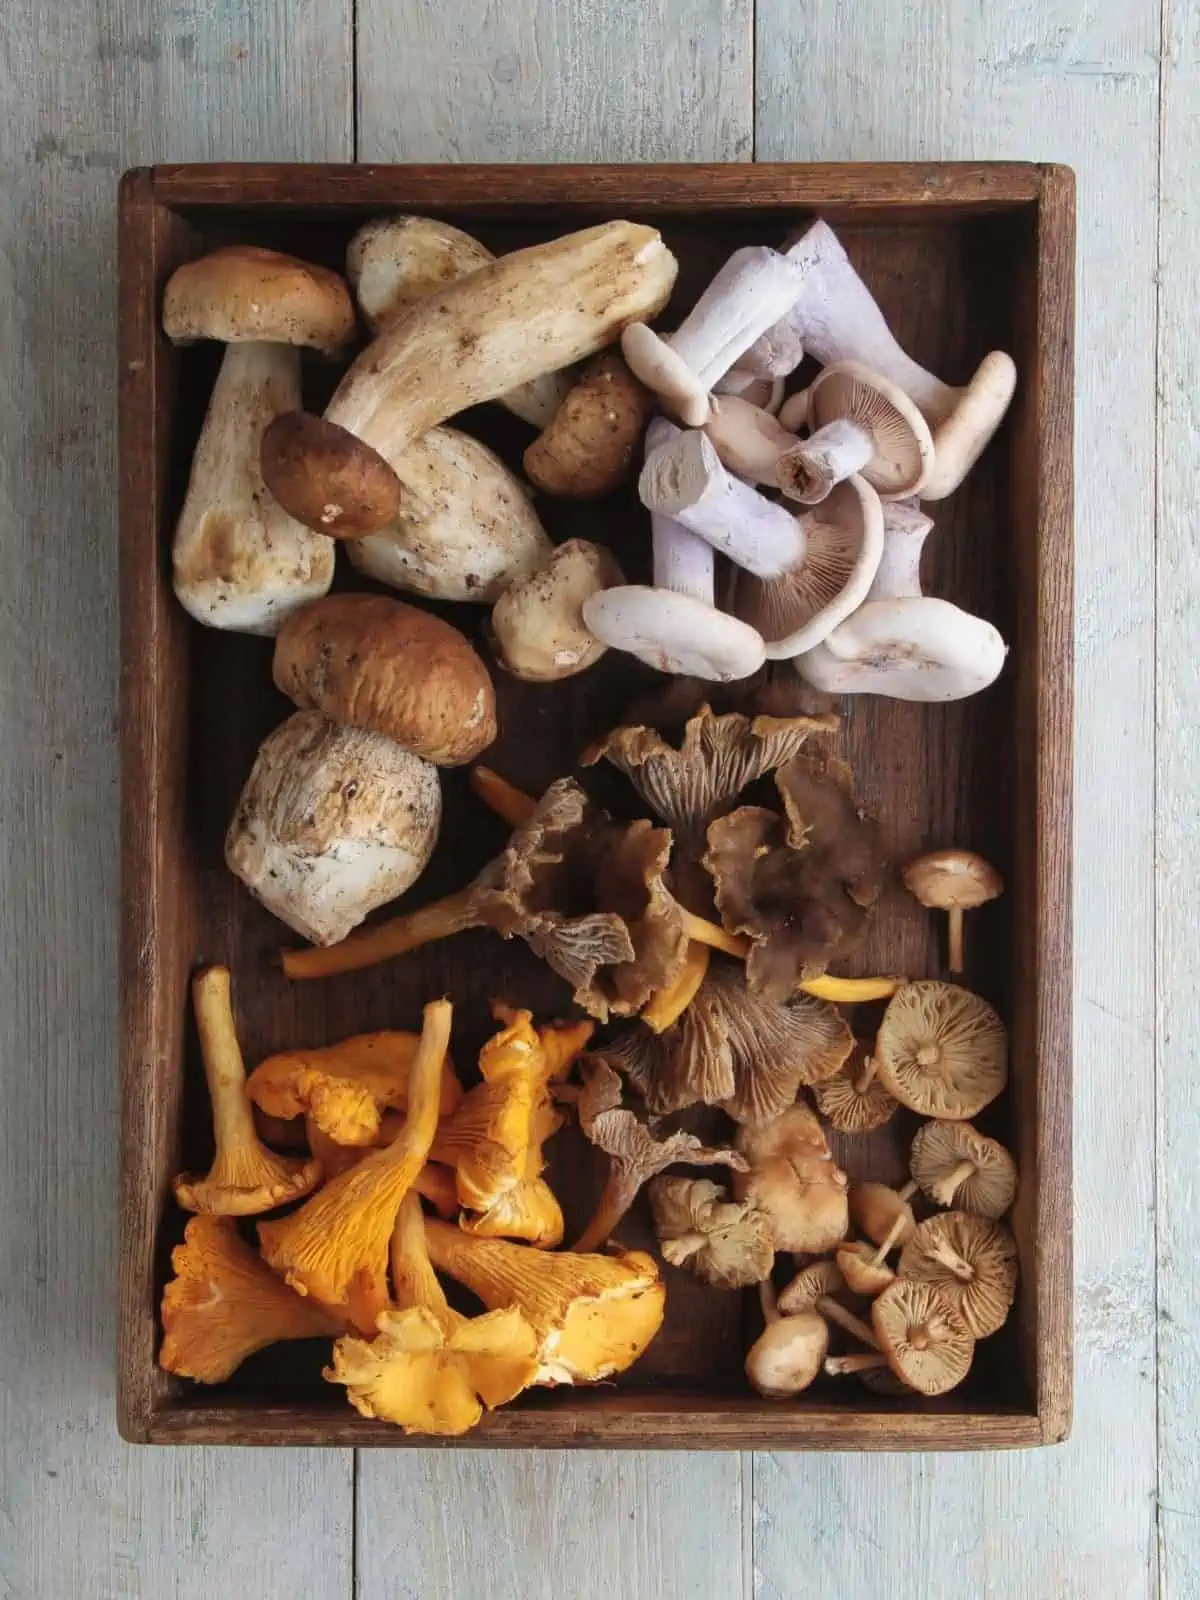 DIFFERENT TYPES OF MUSHROOMS IN A WOODEN TRAY